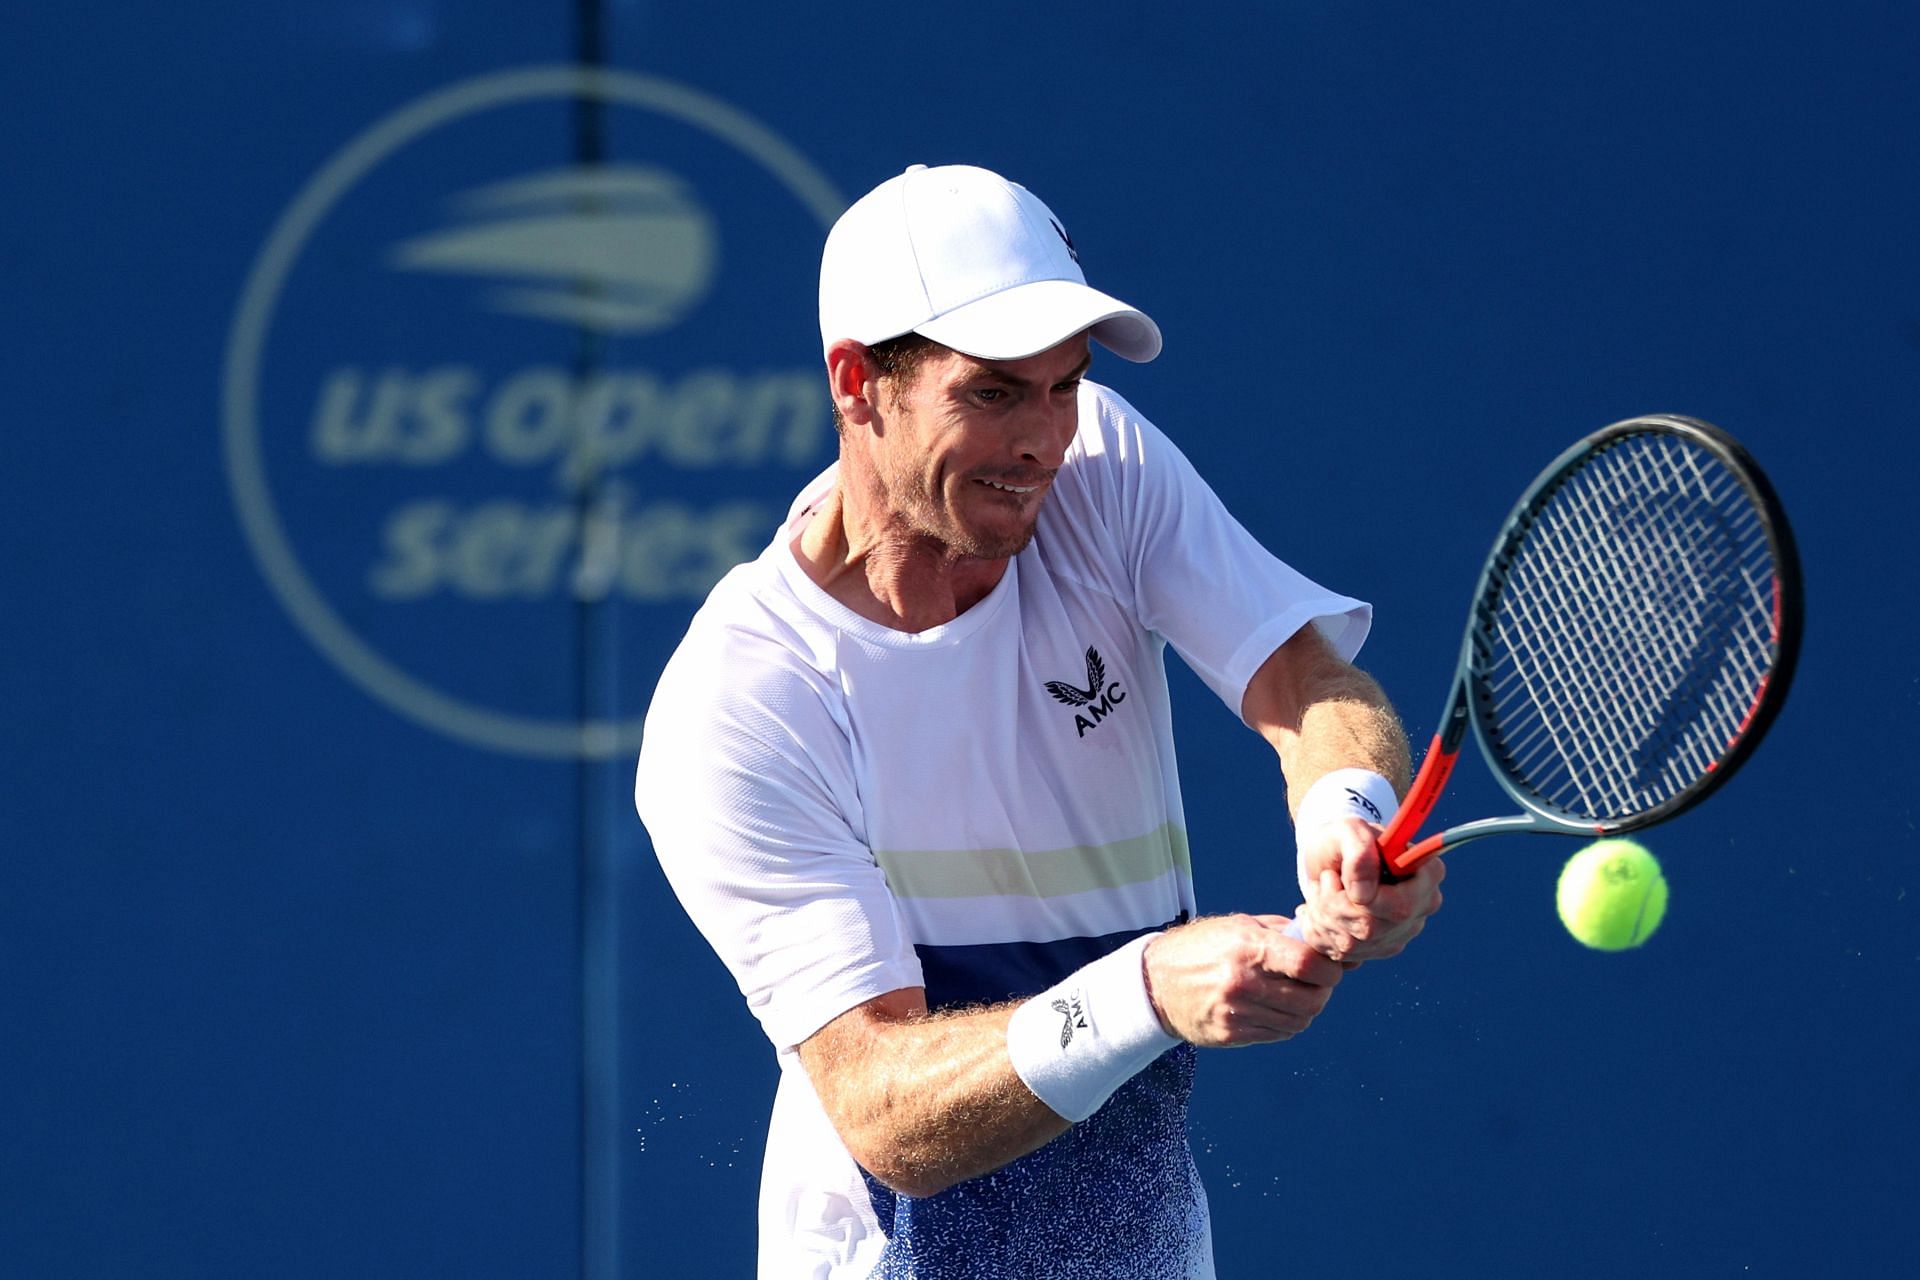 Andy Murray endured an early exit at the Citi Open - Day 3